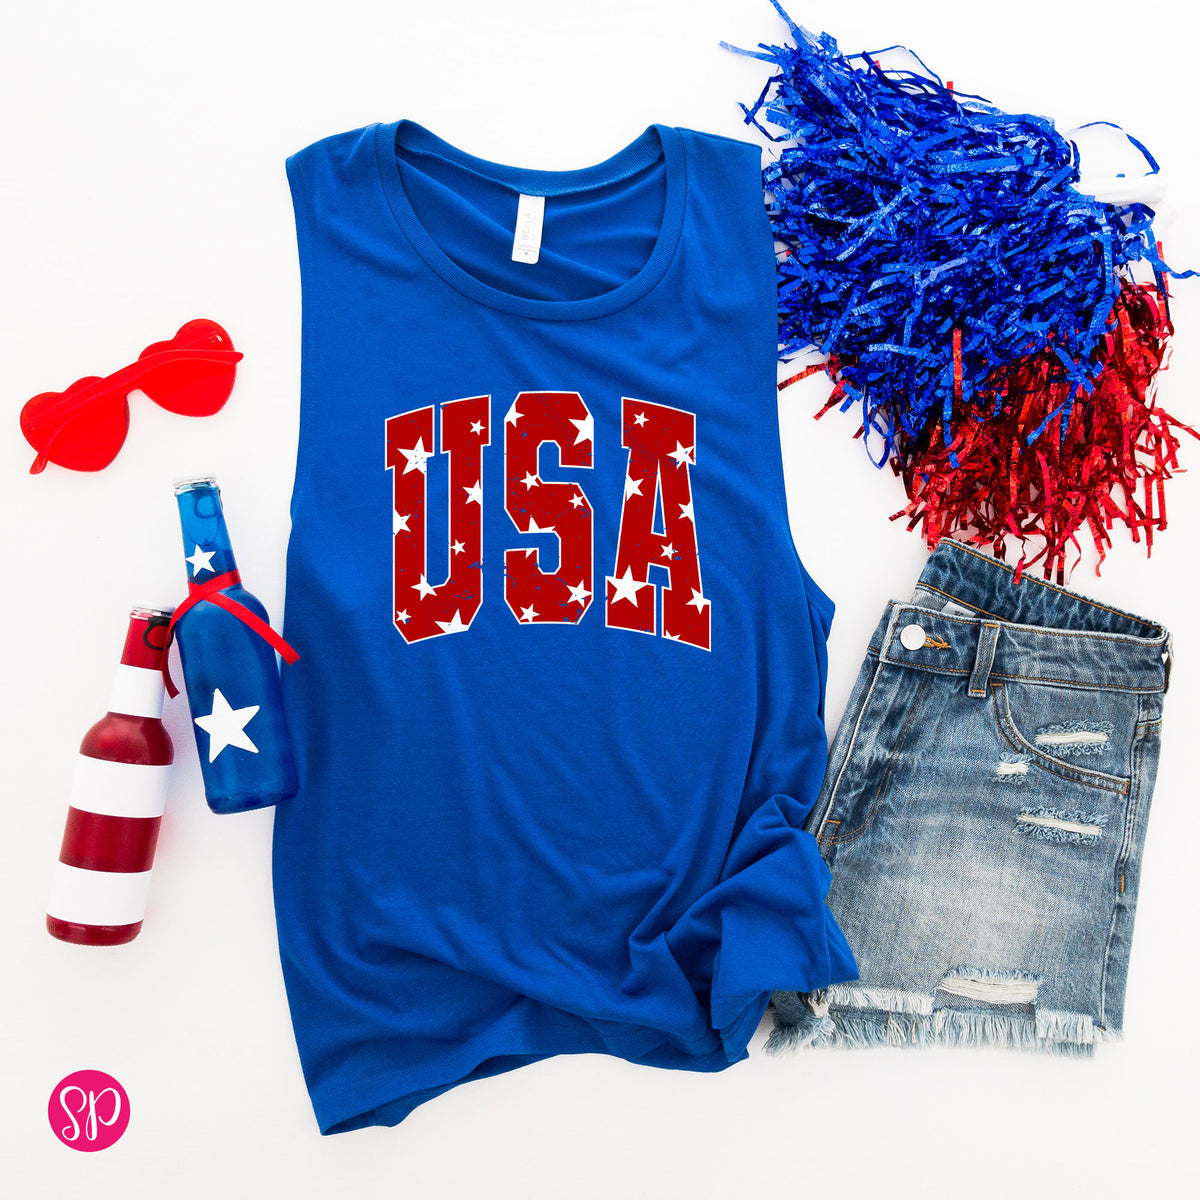 Distressed USA with Stars Muscle Tee